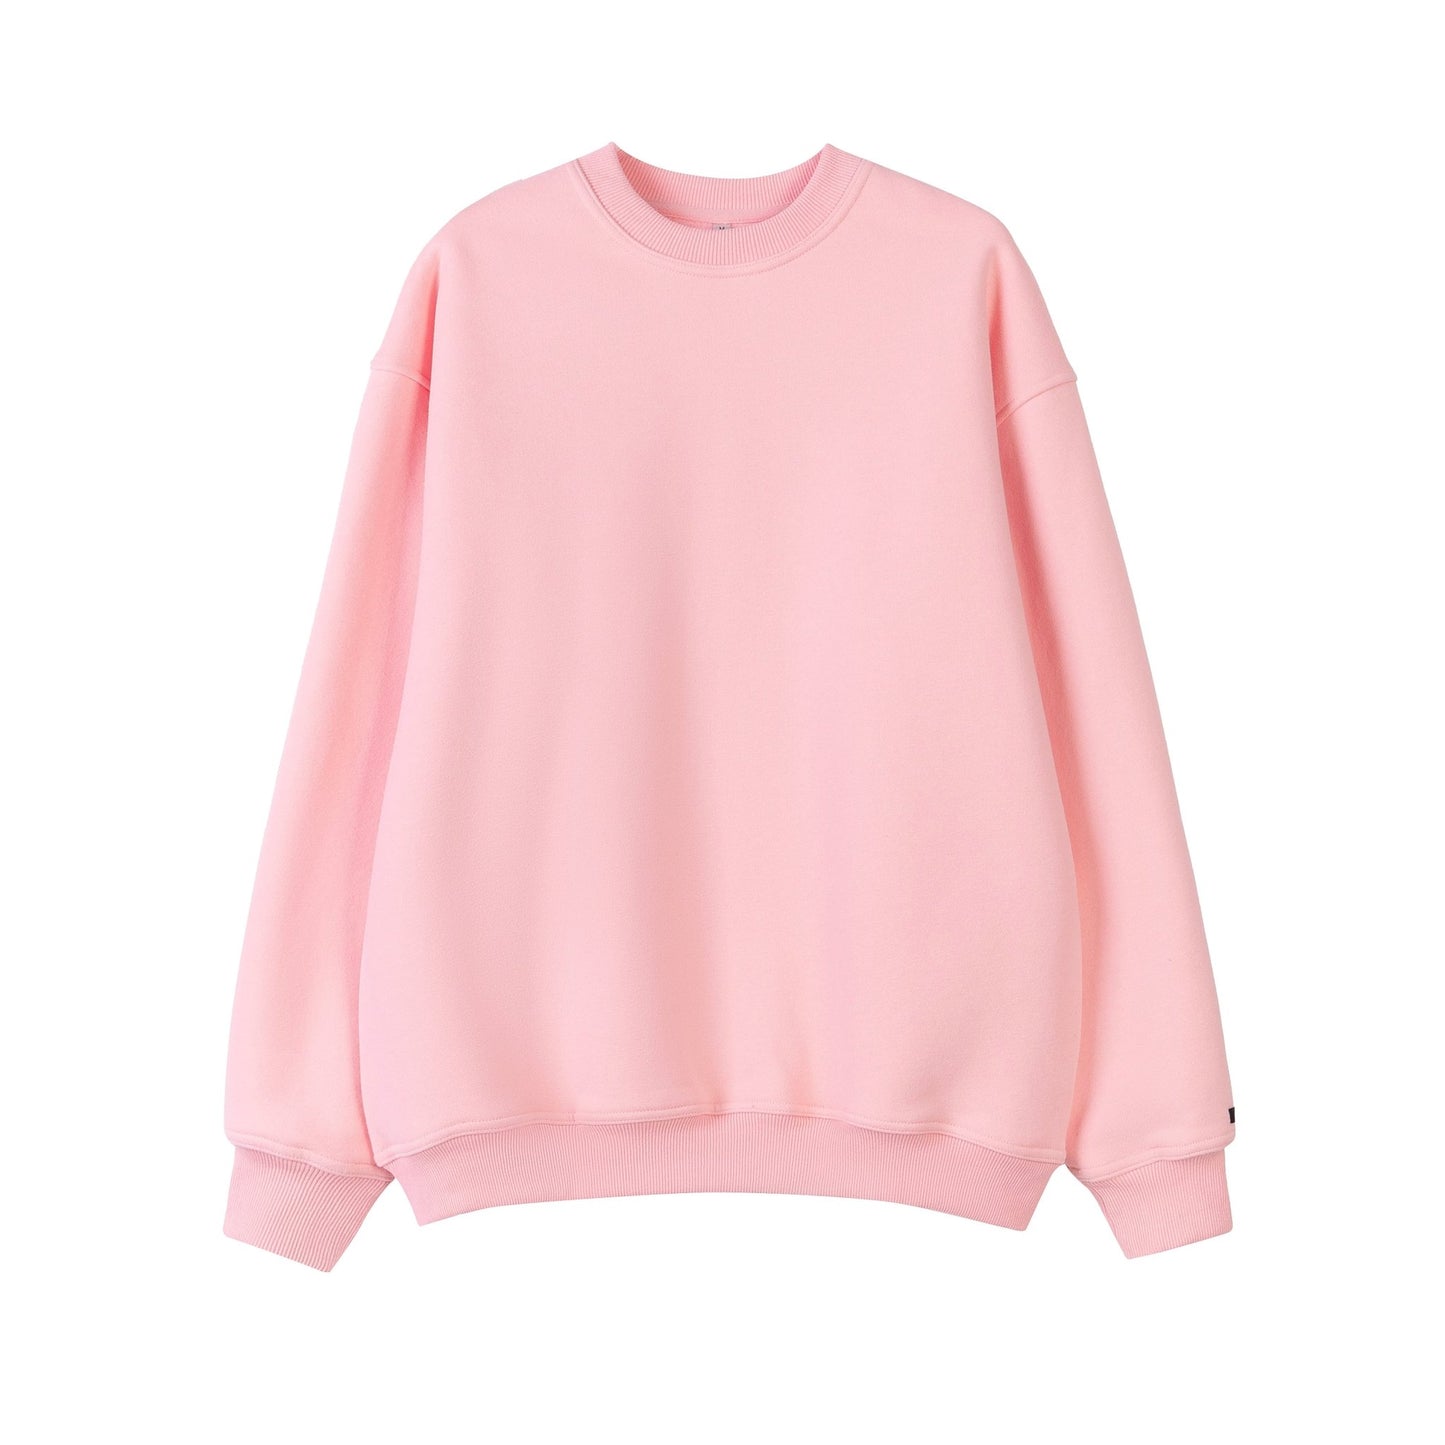 So Soft Sweater - Light Coral